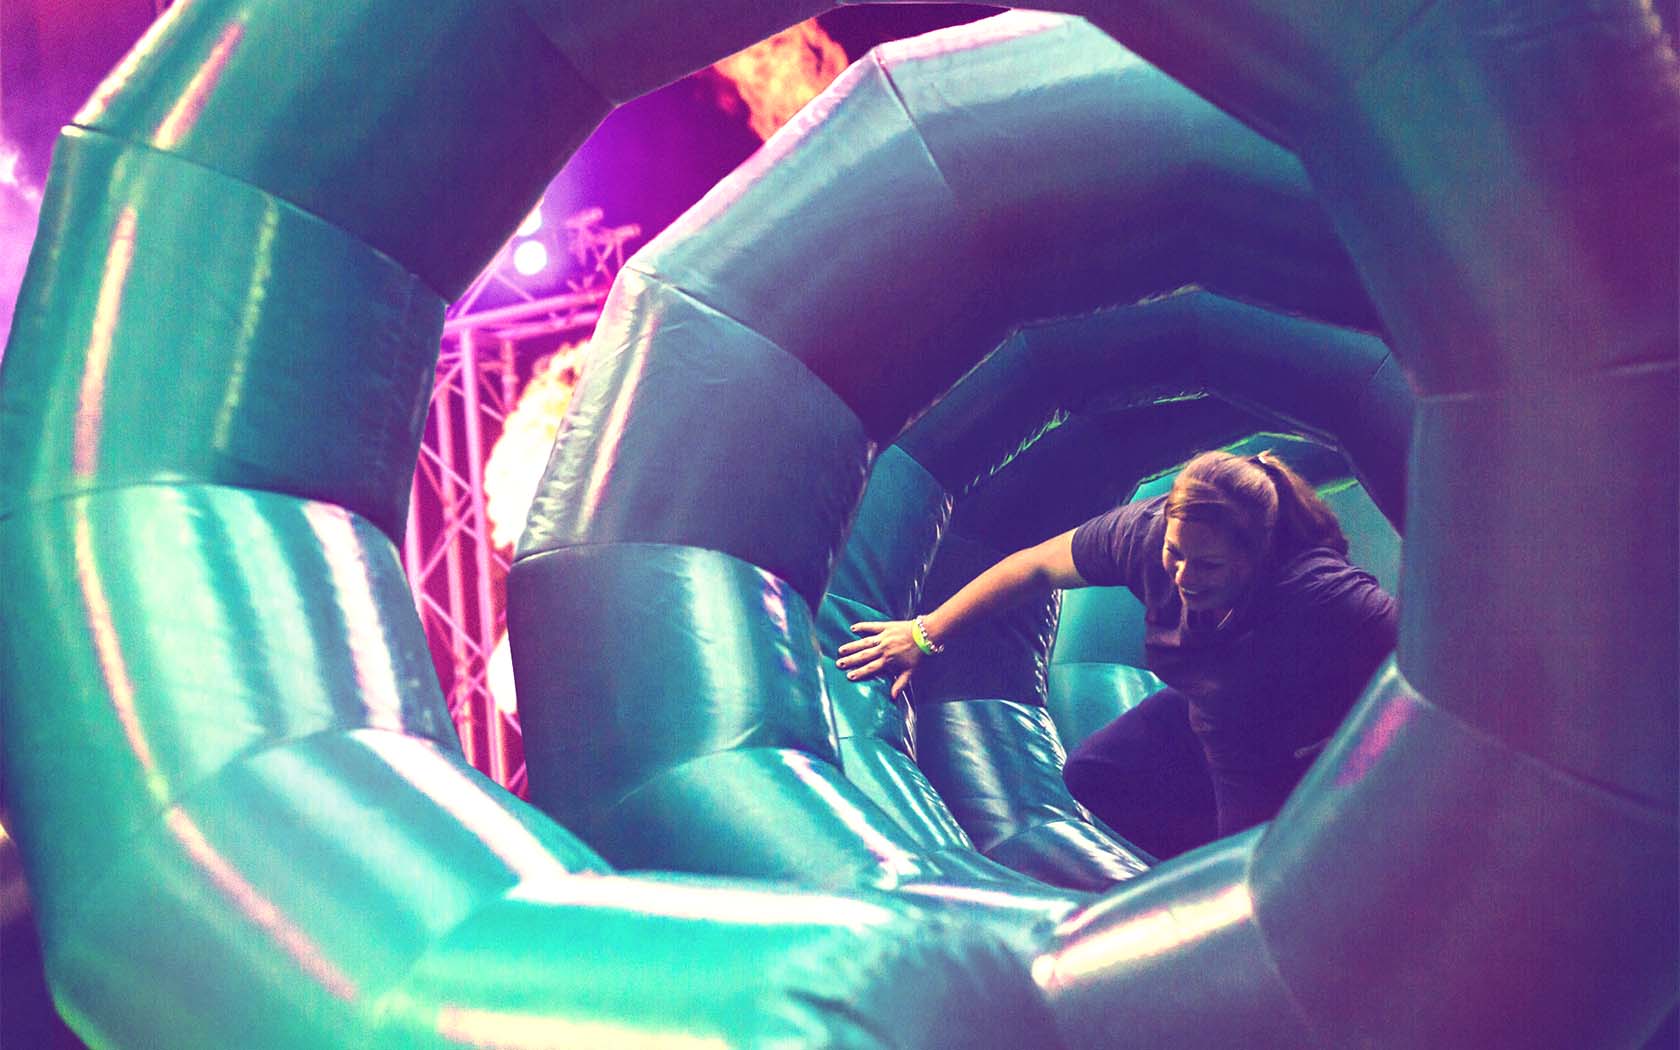 The Monster inflatable obstacle course